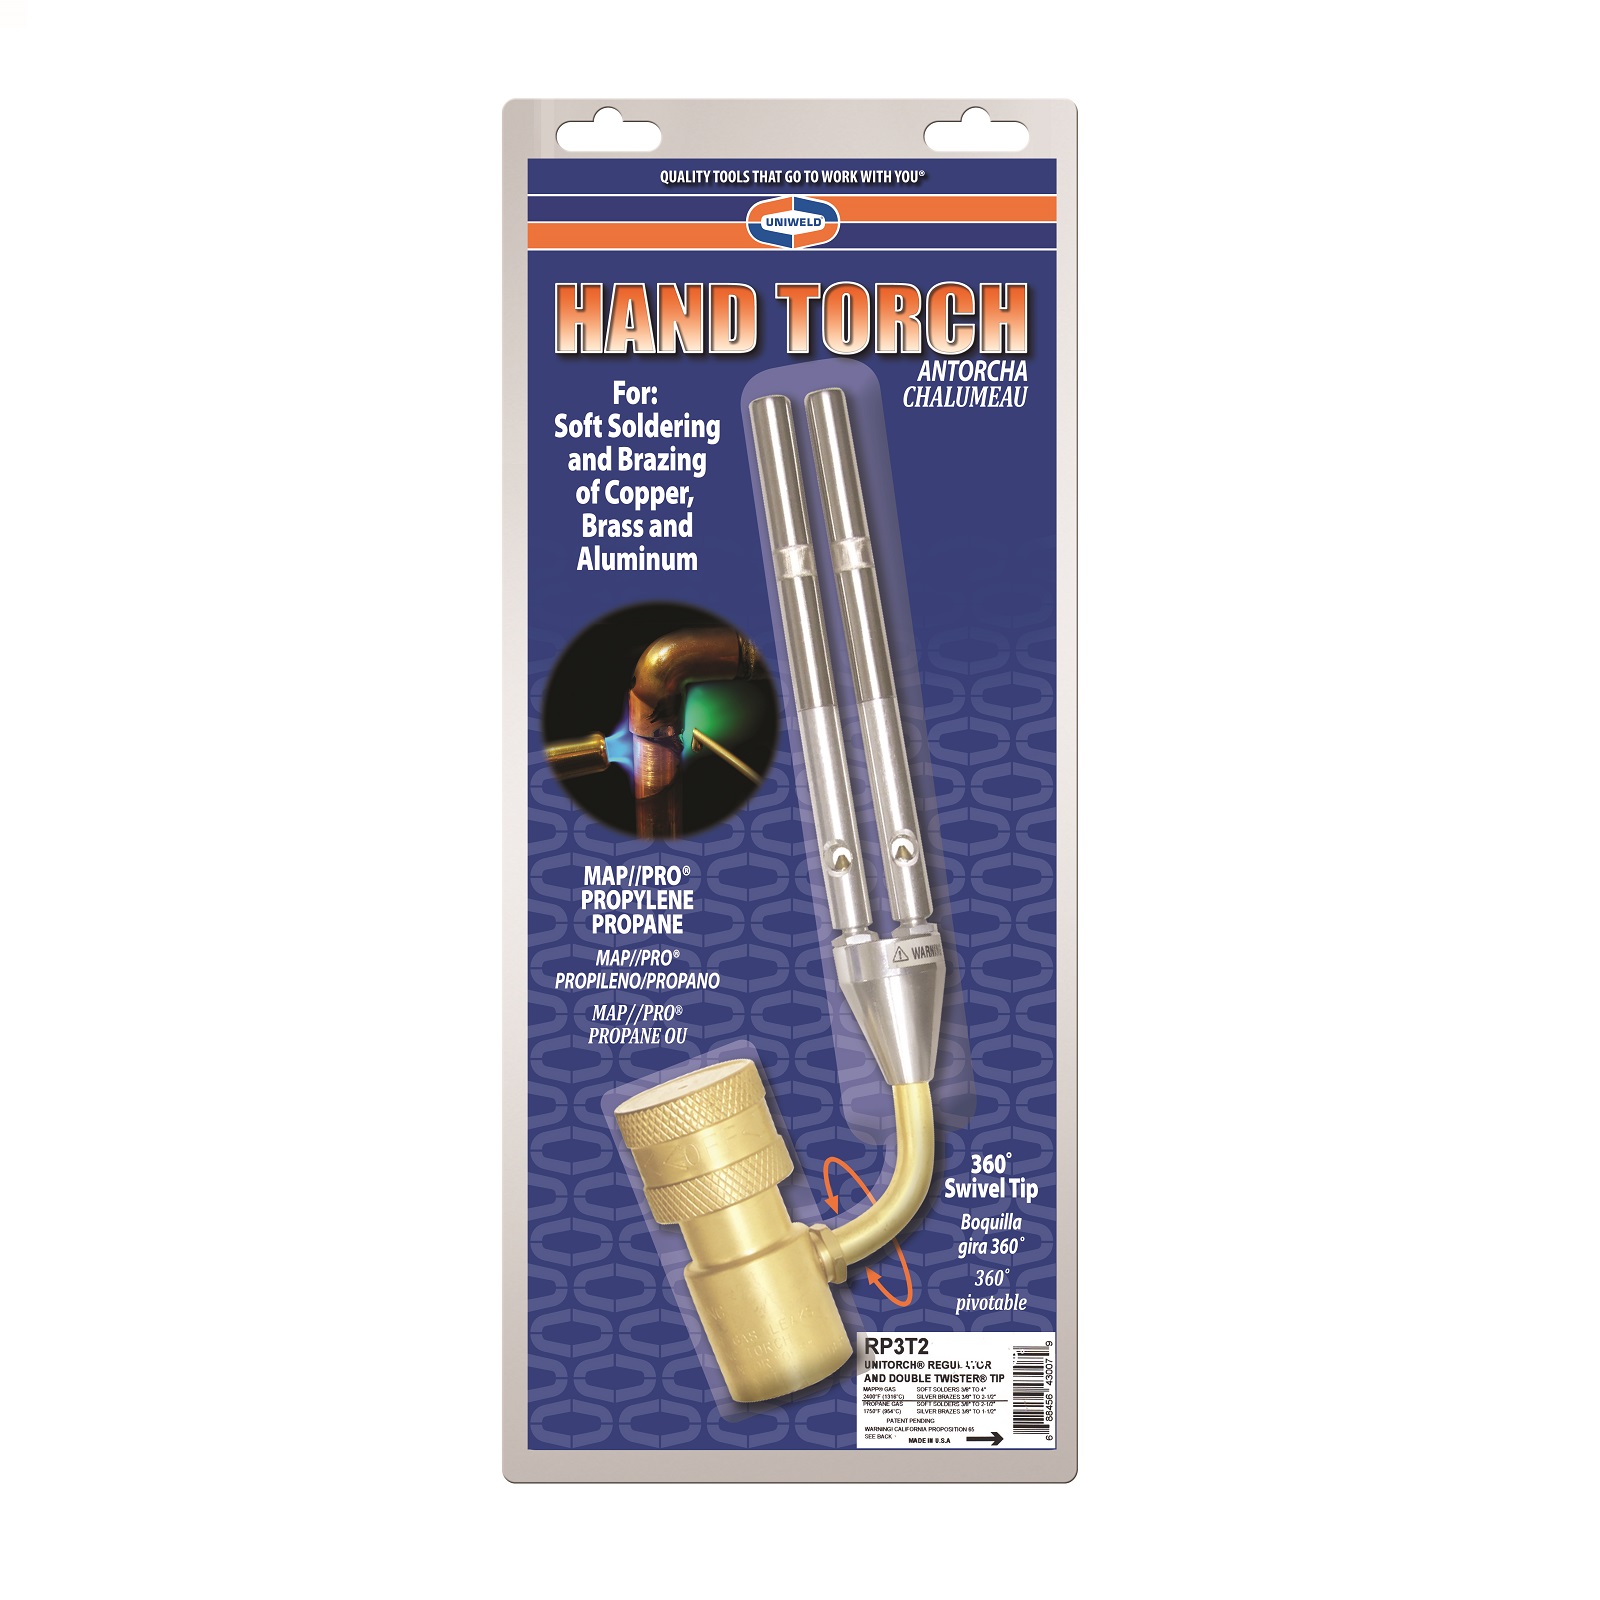 Uniweld RP3T4 Hand Torch with LP Thruster Tip Uniweld Products Inc. 